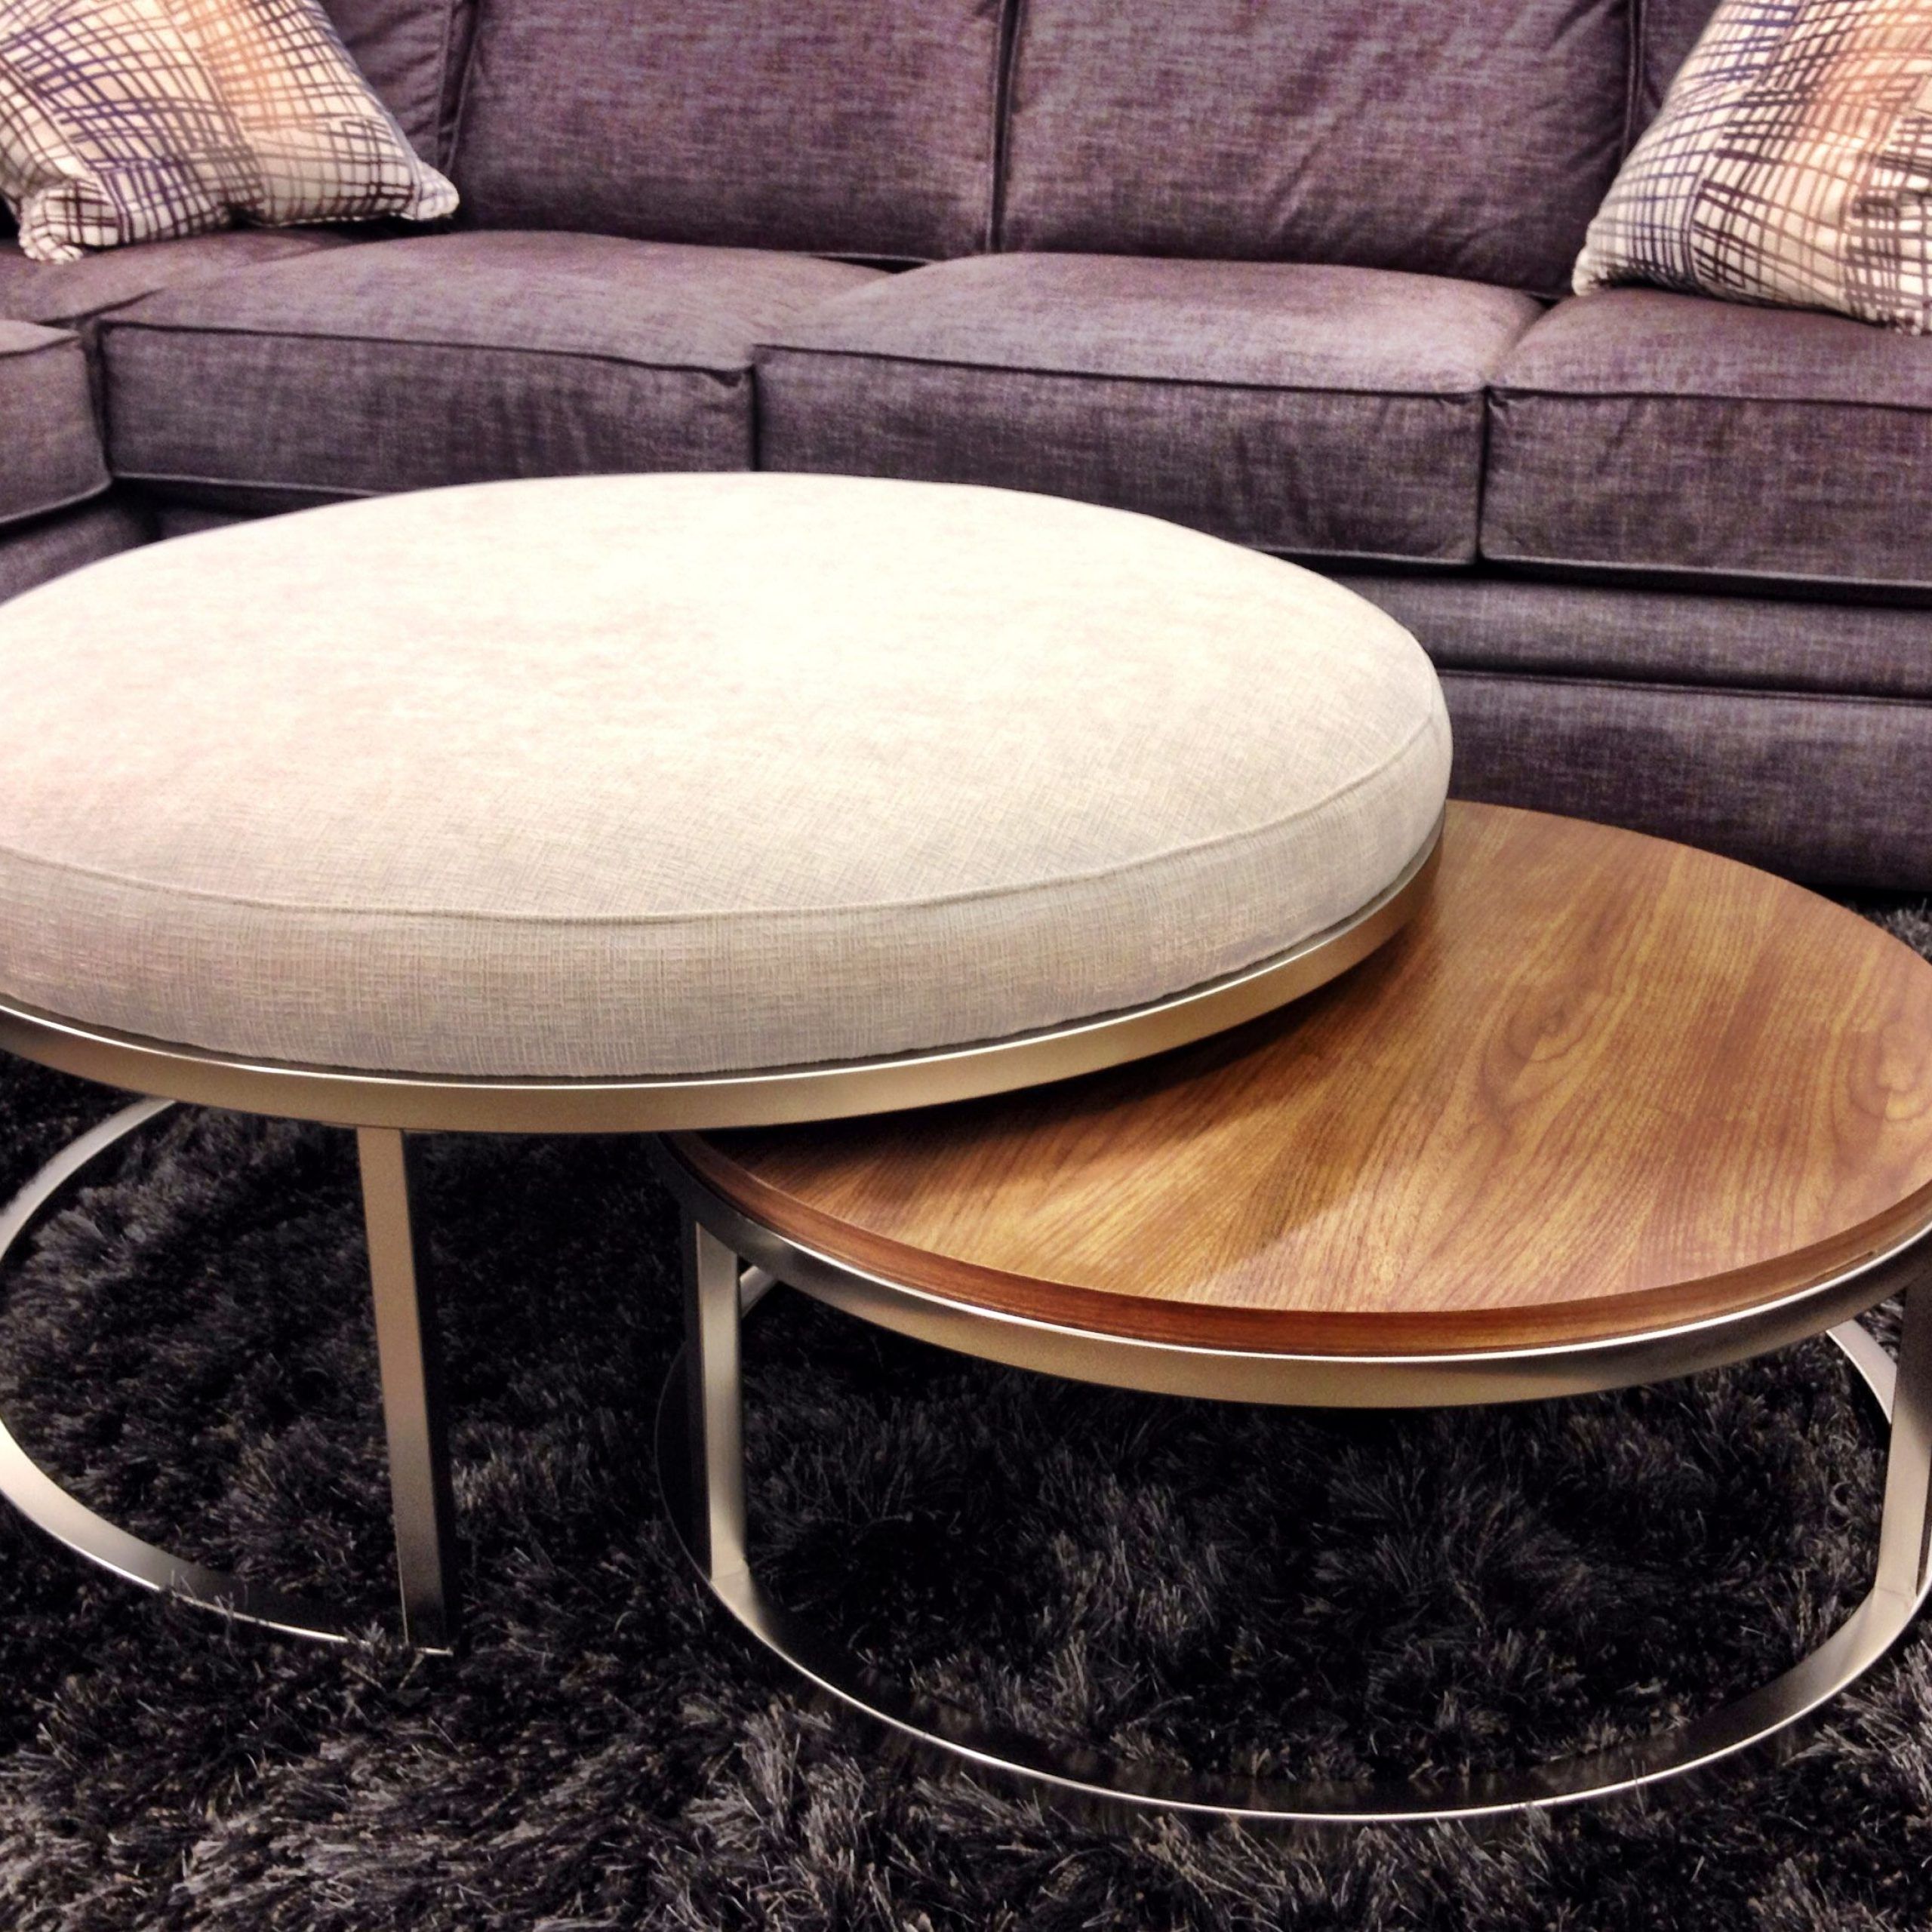 The Best Of Both Worlds Set Of 2 Nesting Coffee Table & Ottoman (View 10 of 10)